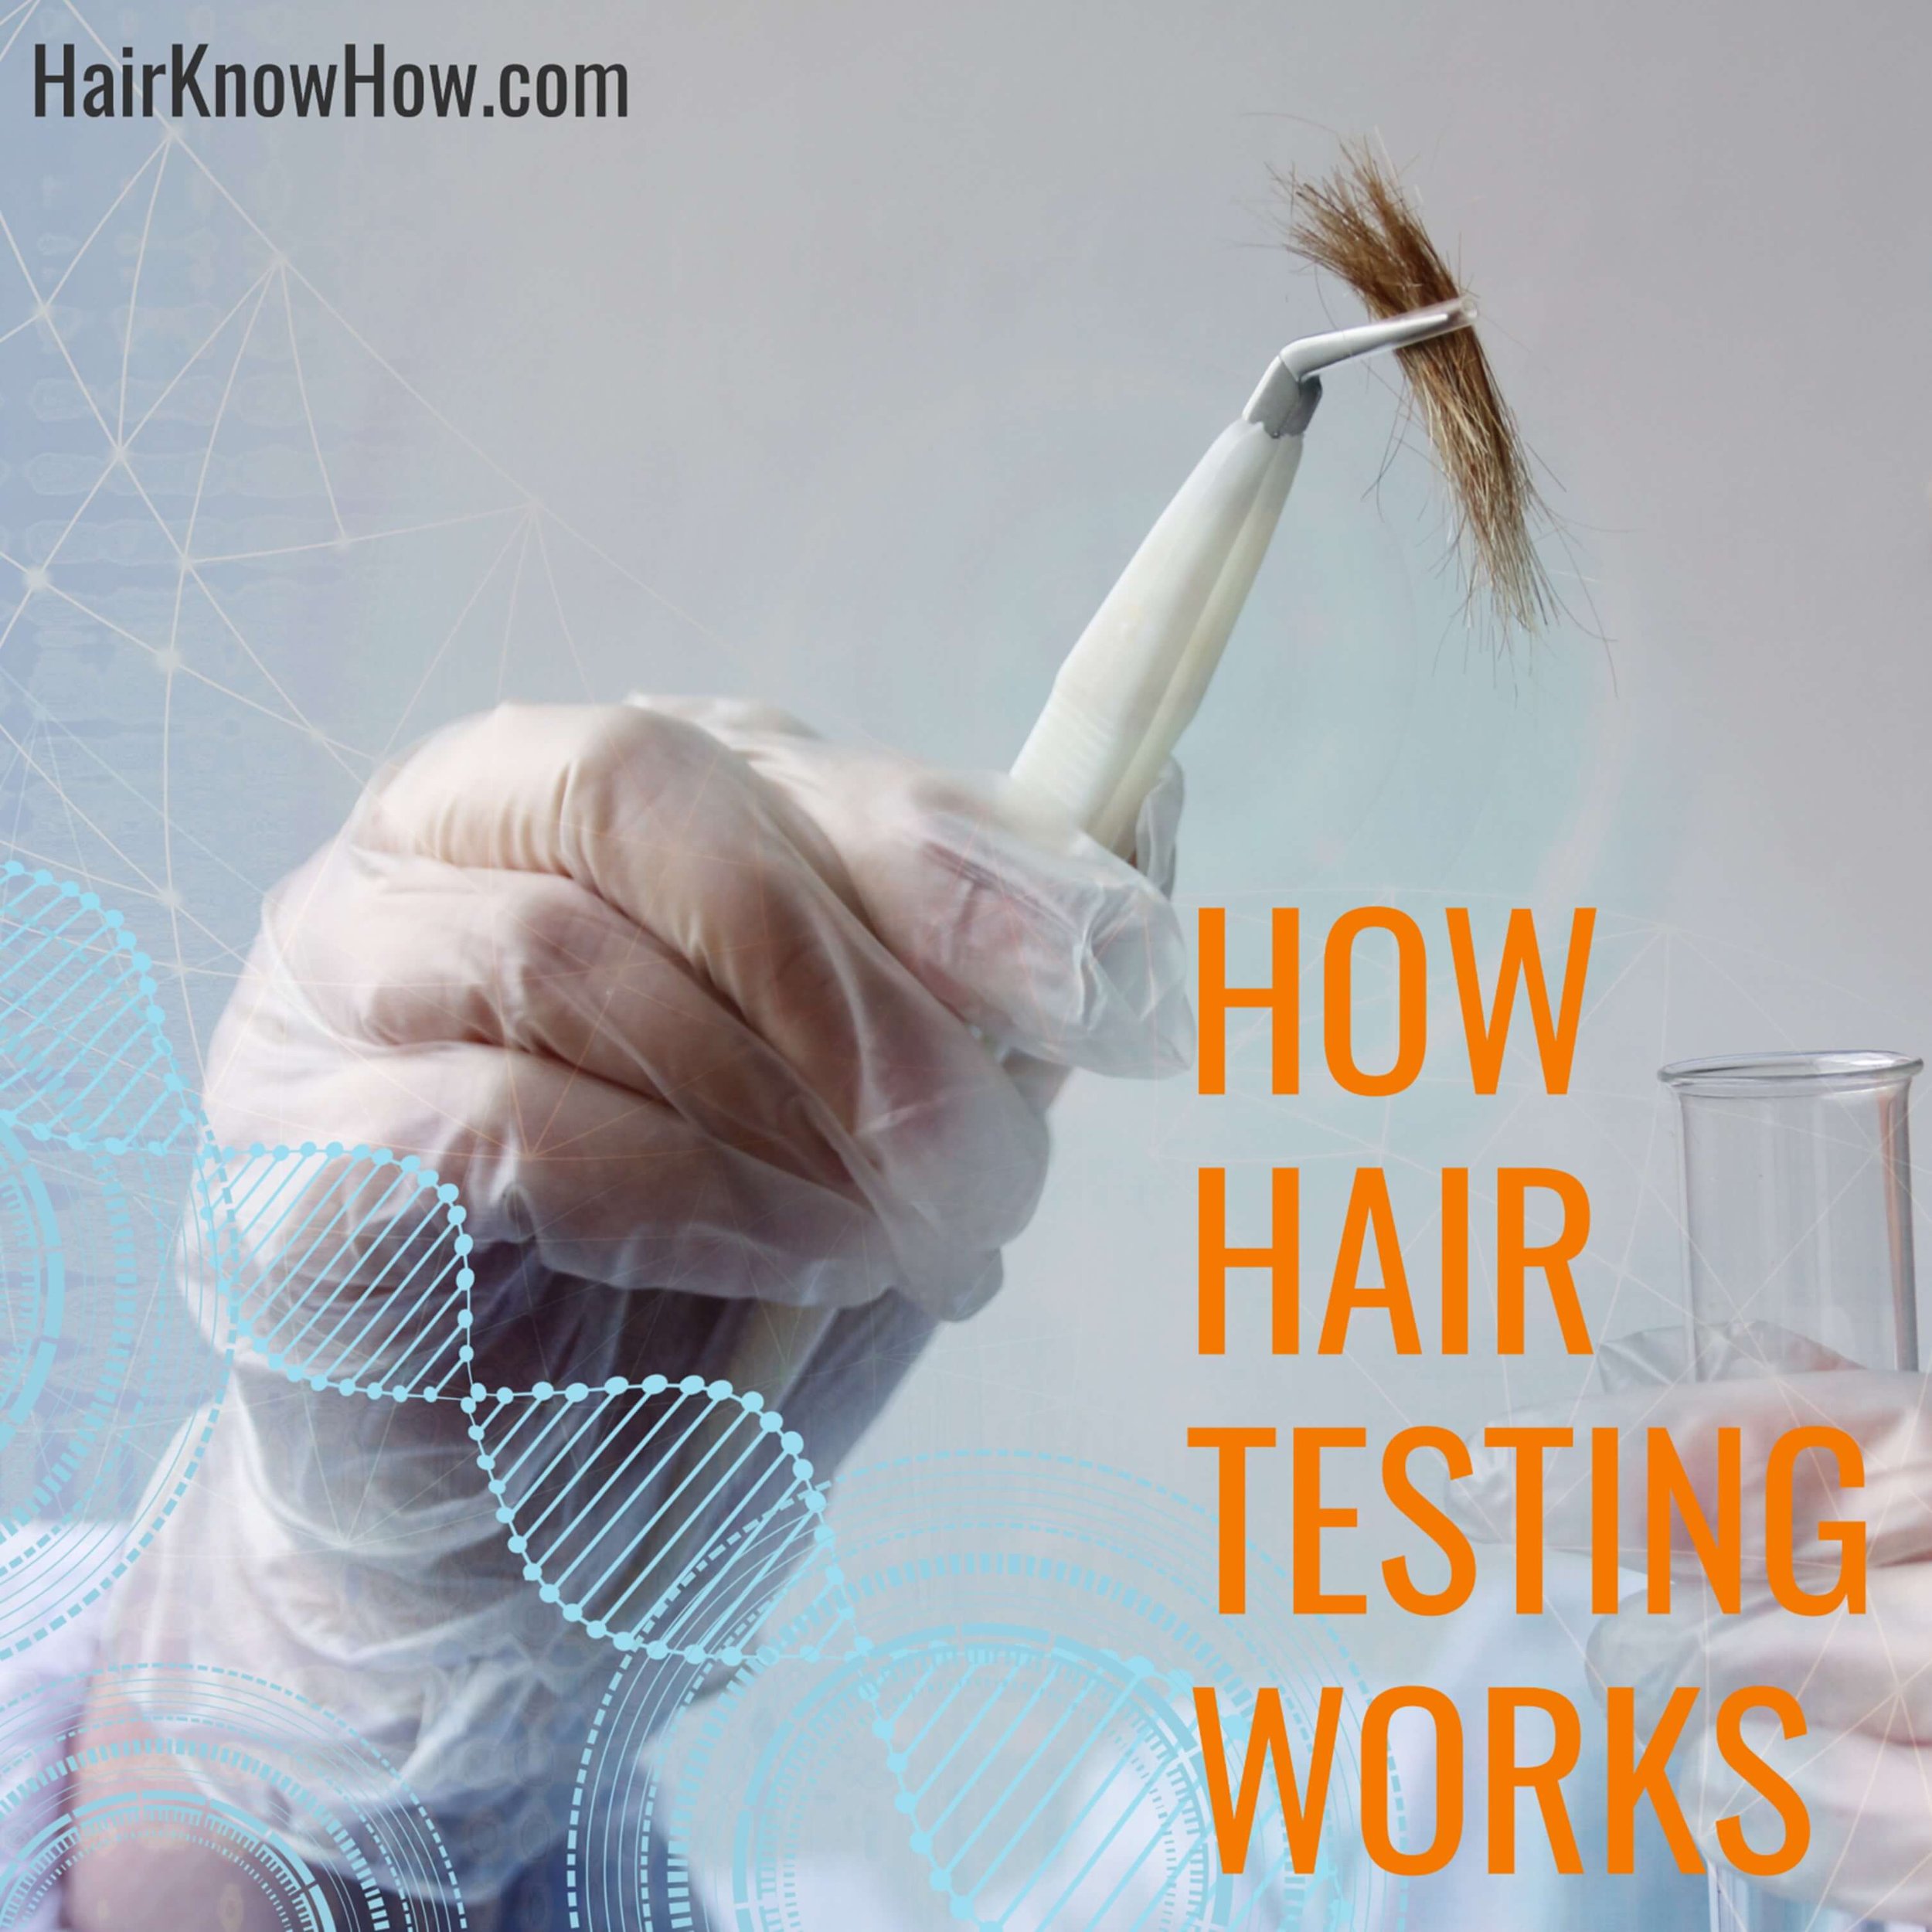 Hair Testing For Drugs - Understand Everything —  Get  Accurate Results with Our Professional Hair Test & Analysis Services -  Unlock Your Hair's True Potential